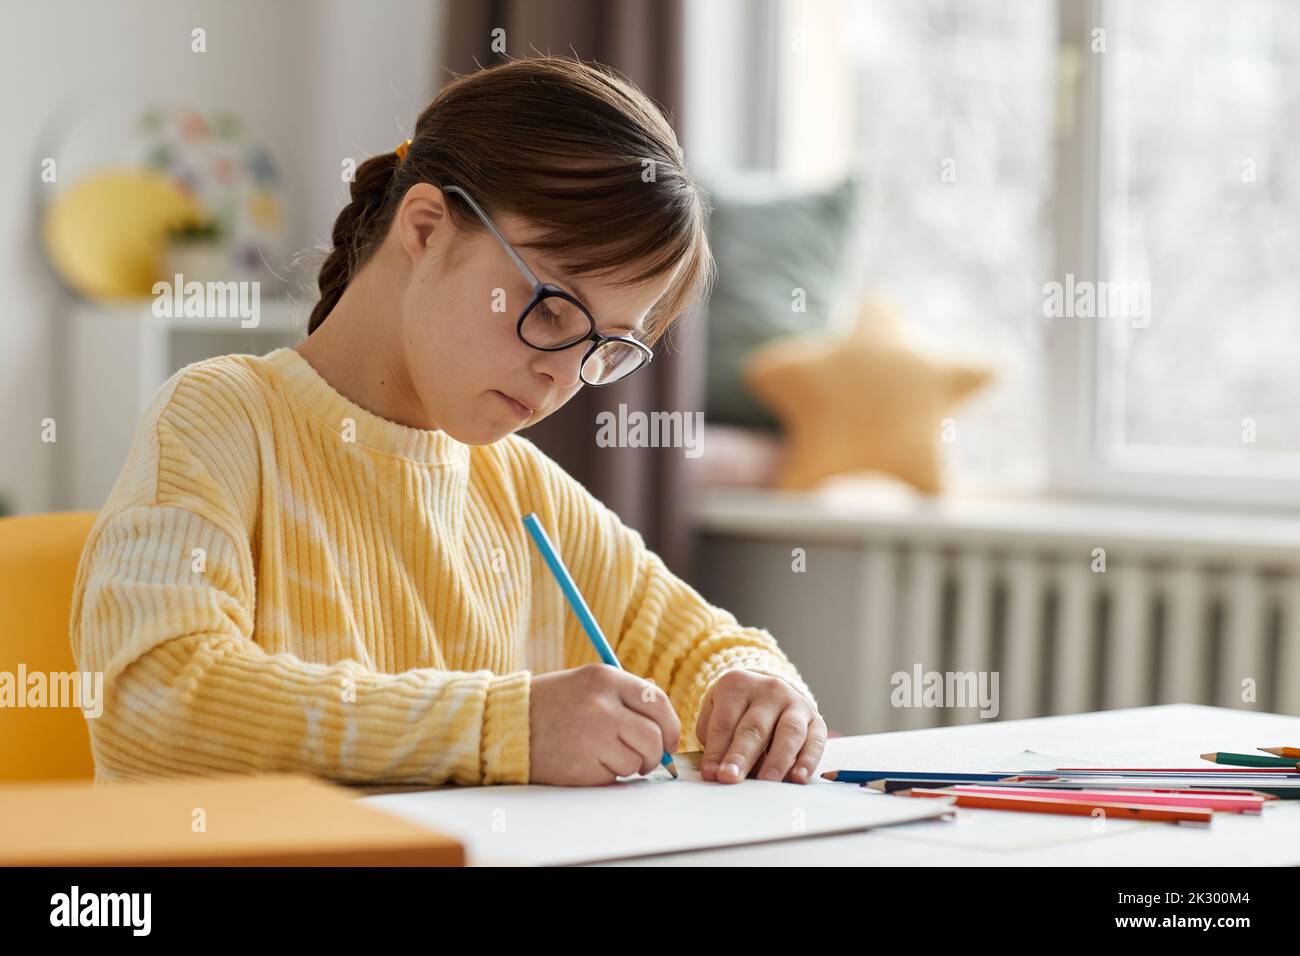 Portrait of cute girl with Down syndrome drawing pictures while sitting at desk at home, copy space Stock Photo